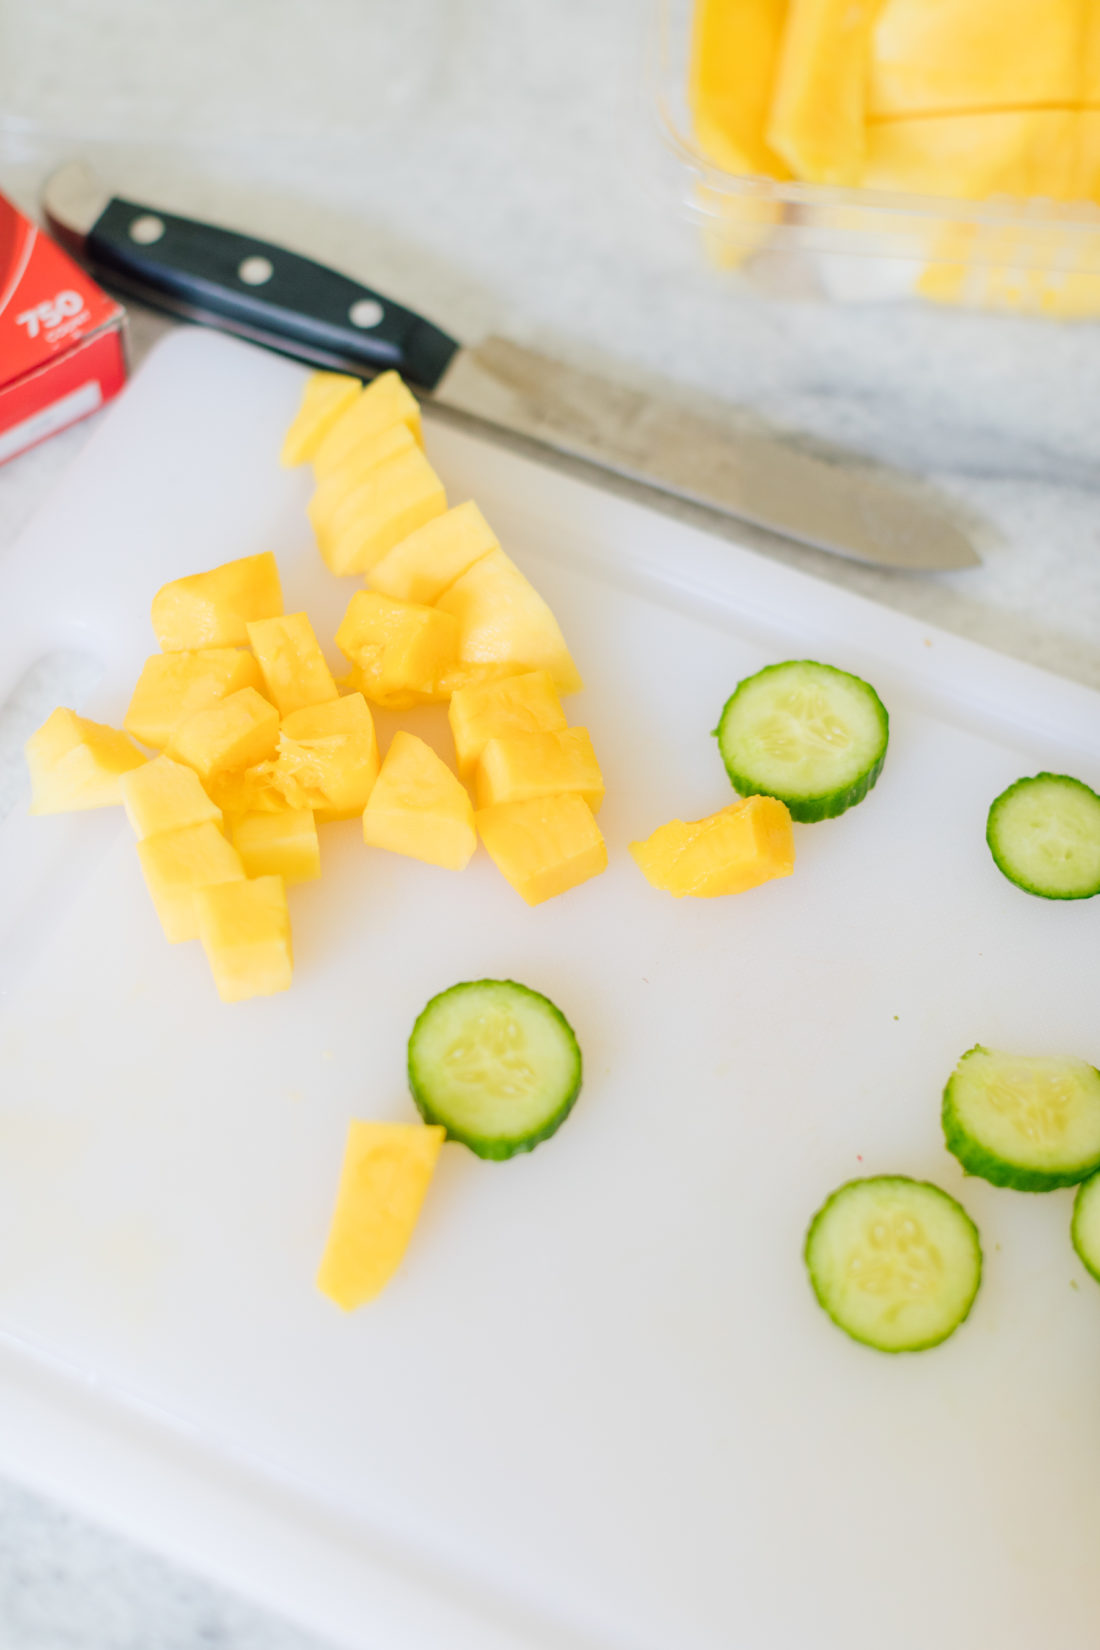 Eva Amurri Martino chops up cucumbers and fruit for an easy lunchbox meal